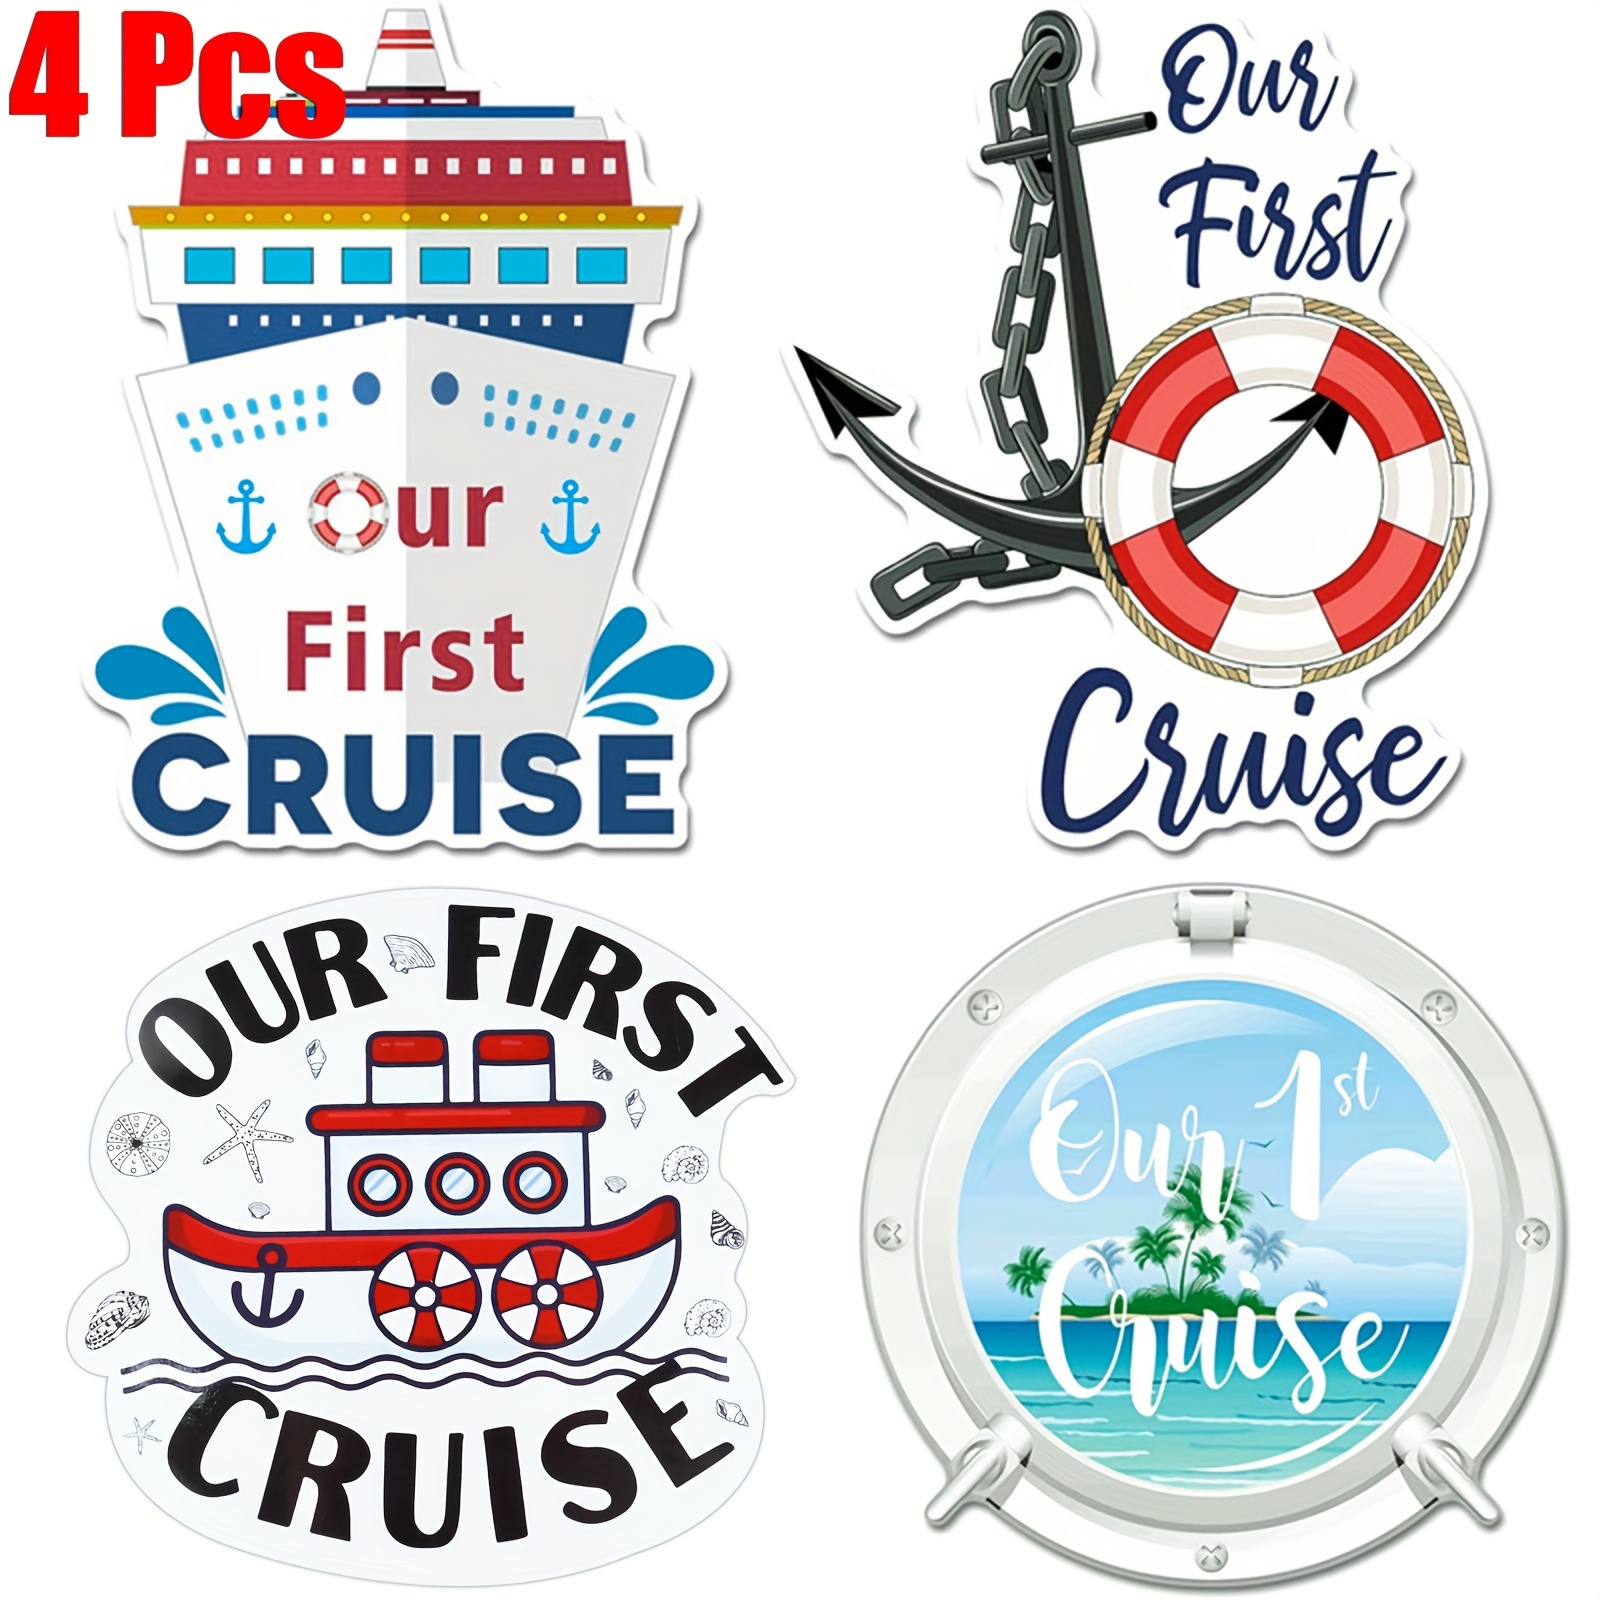 2pcs Cruise Door Magnets, Anchor Cruise Door Magnets with 3pcs